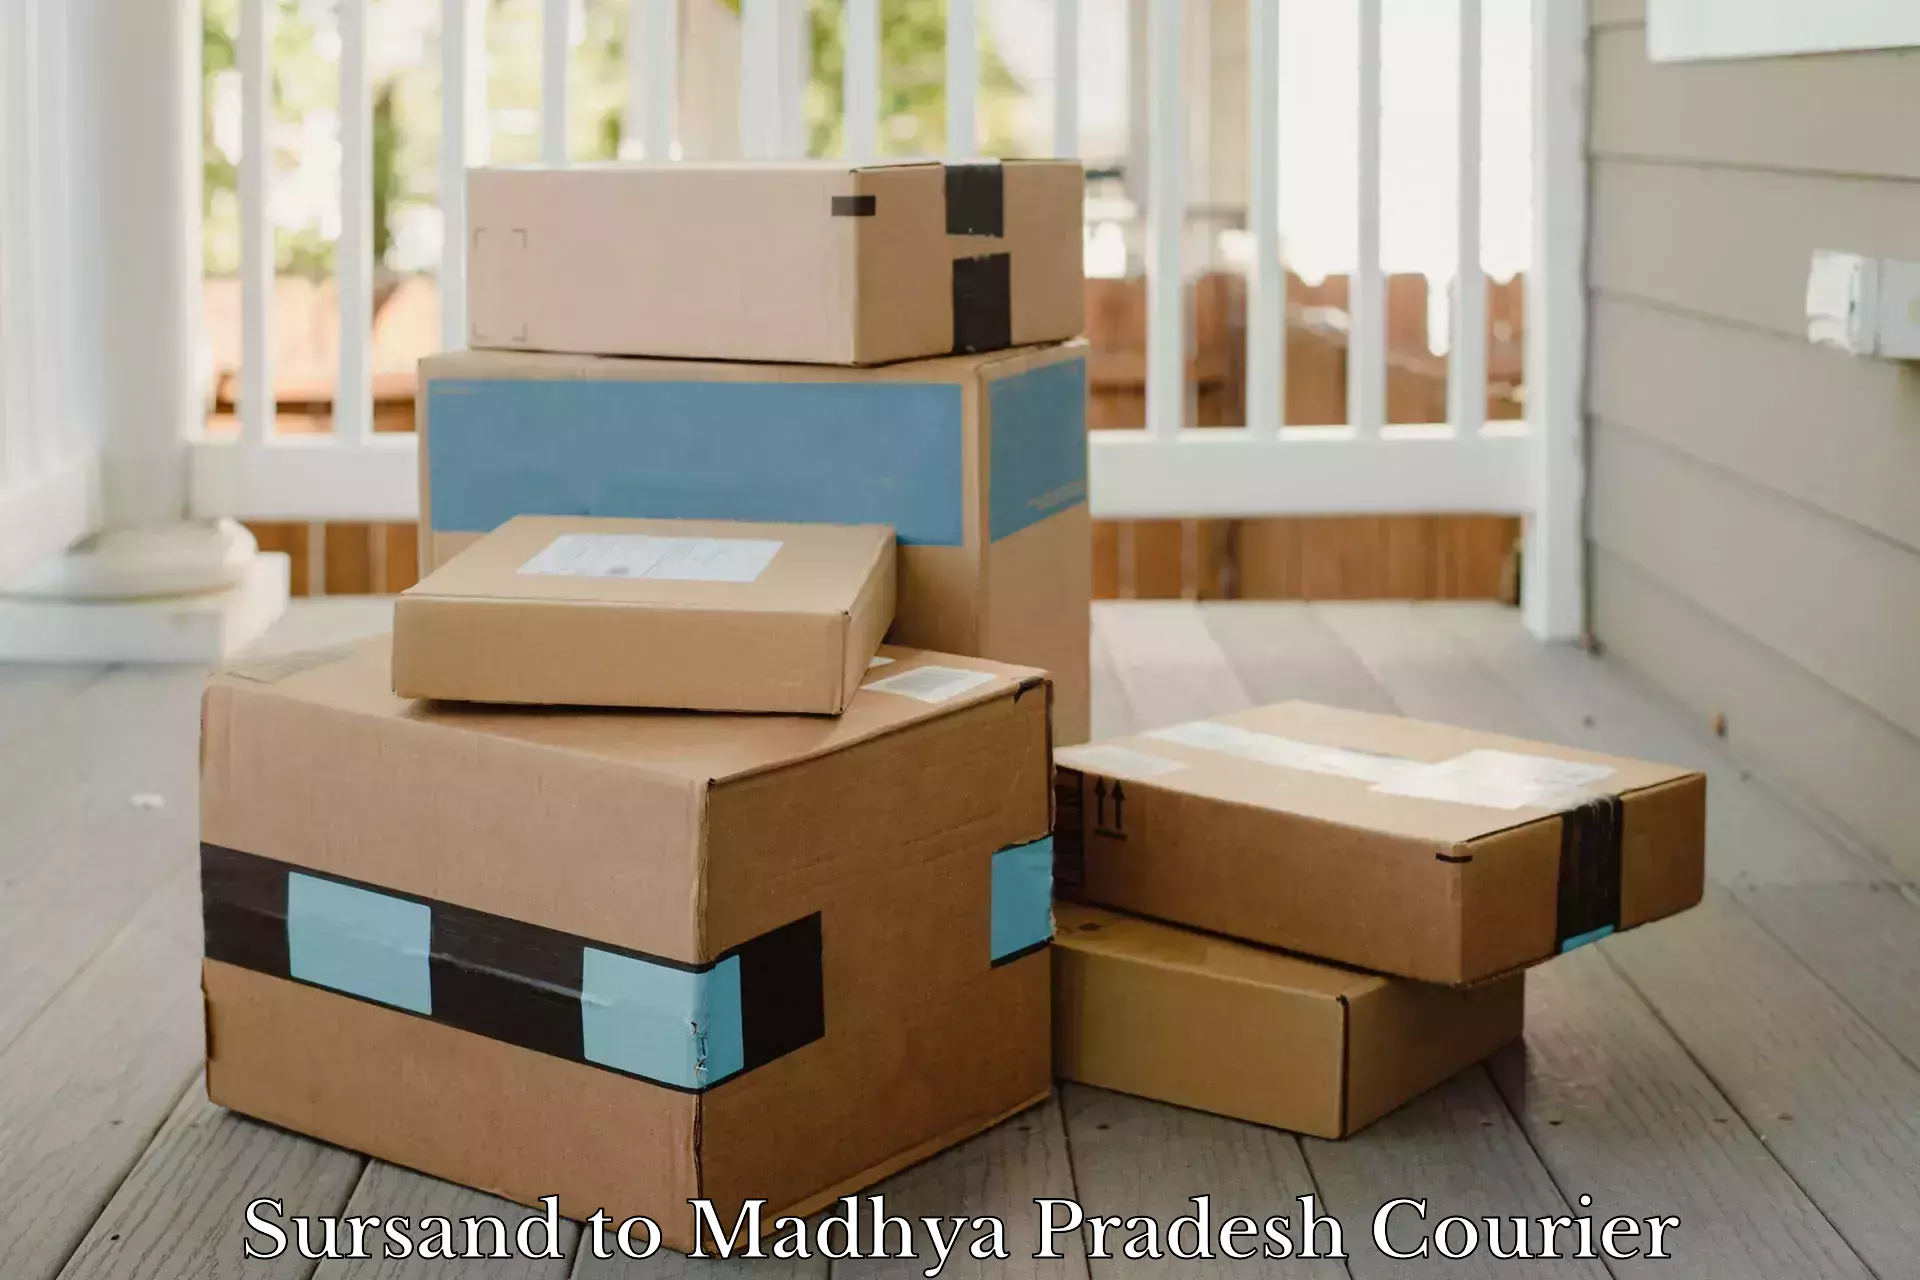 Round-the-clock parcel delivery Sursand to Shajapur